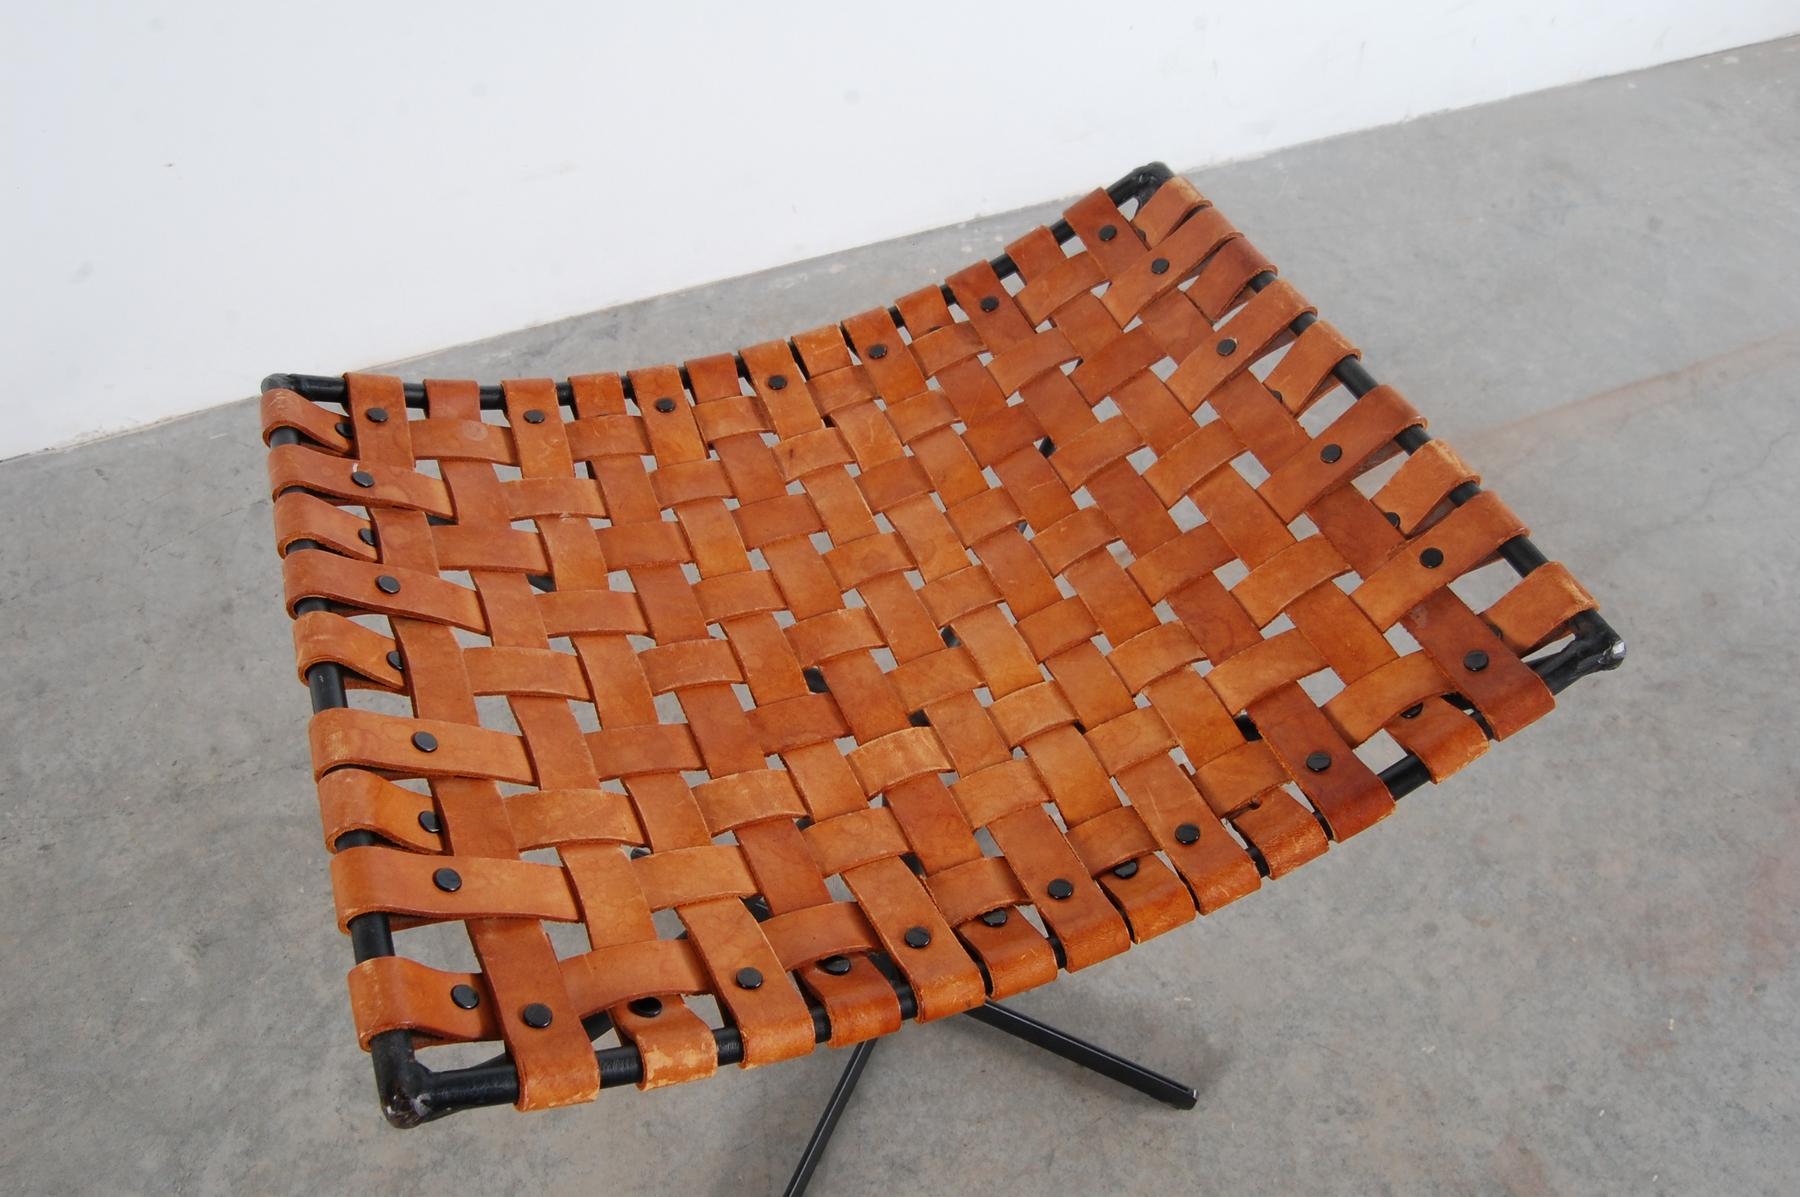 Woven Leather and Iron Stool by Max Gottschalk 1